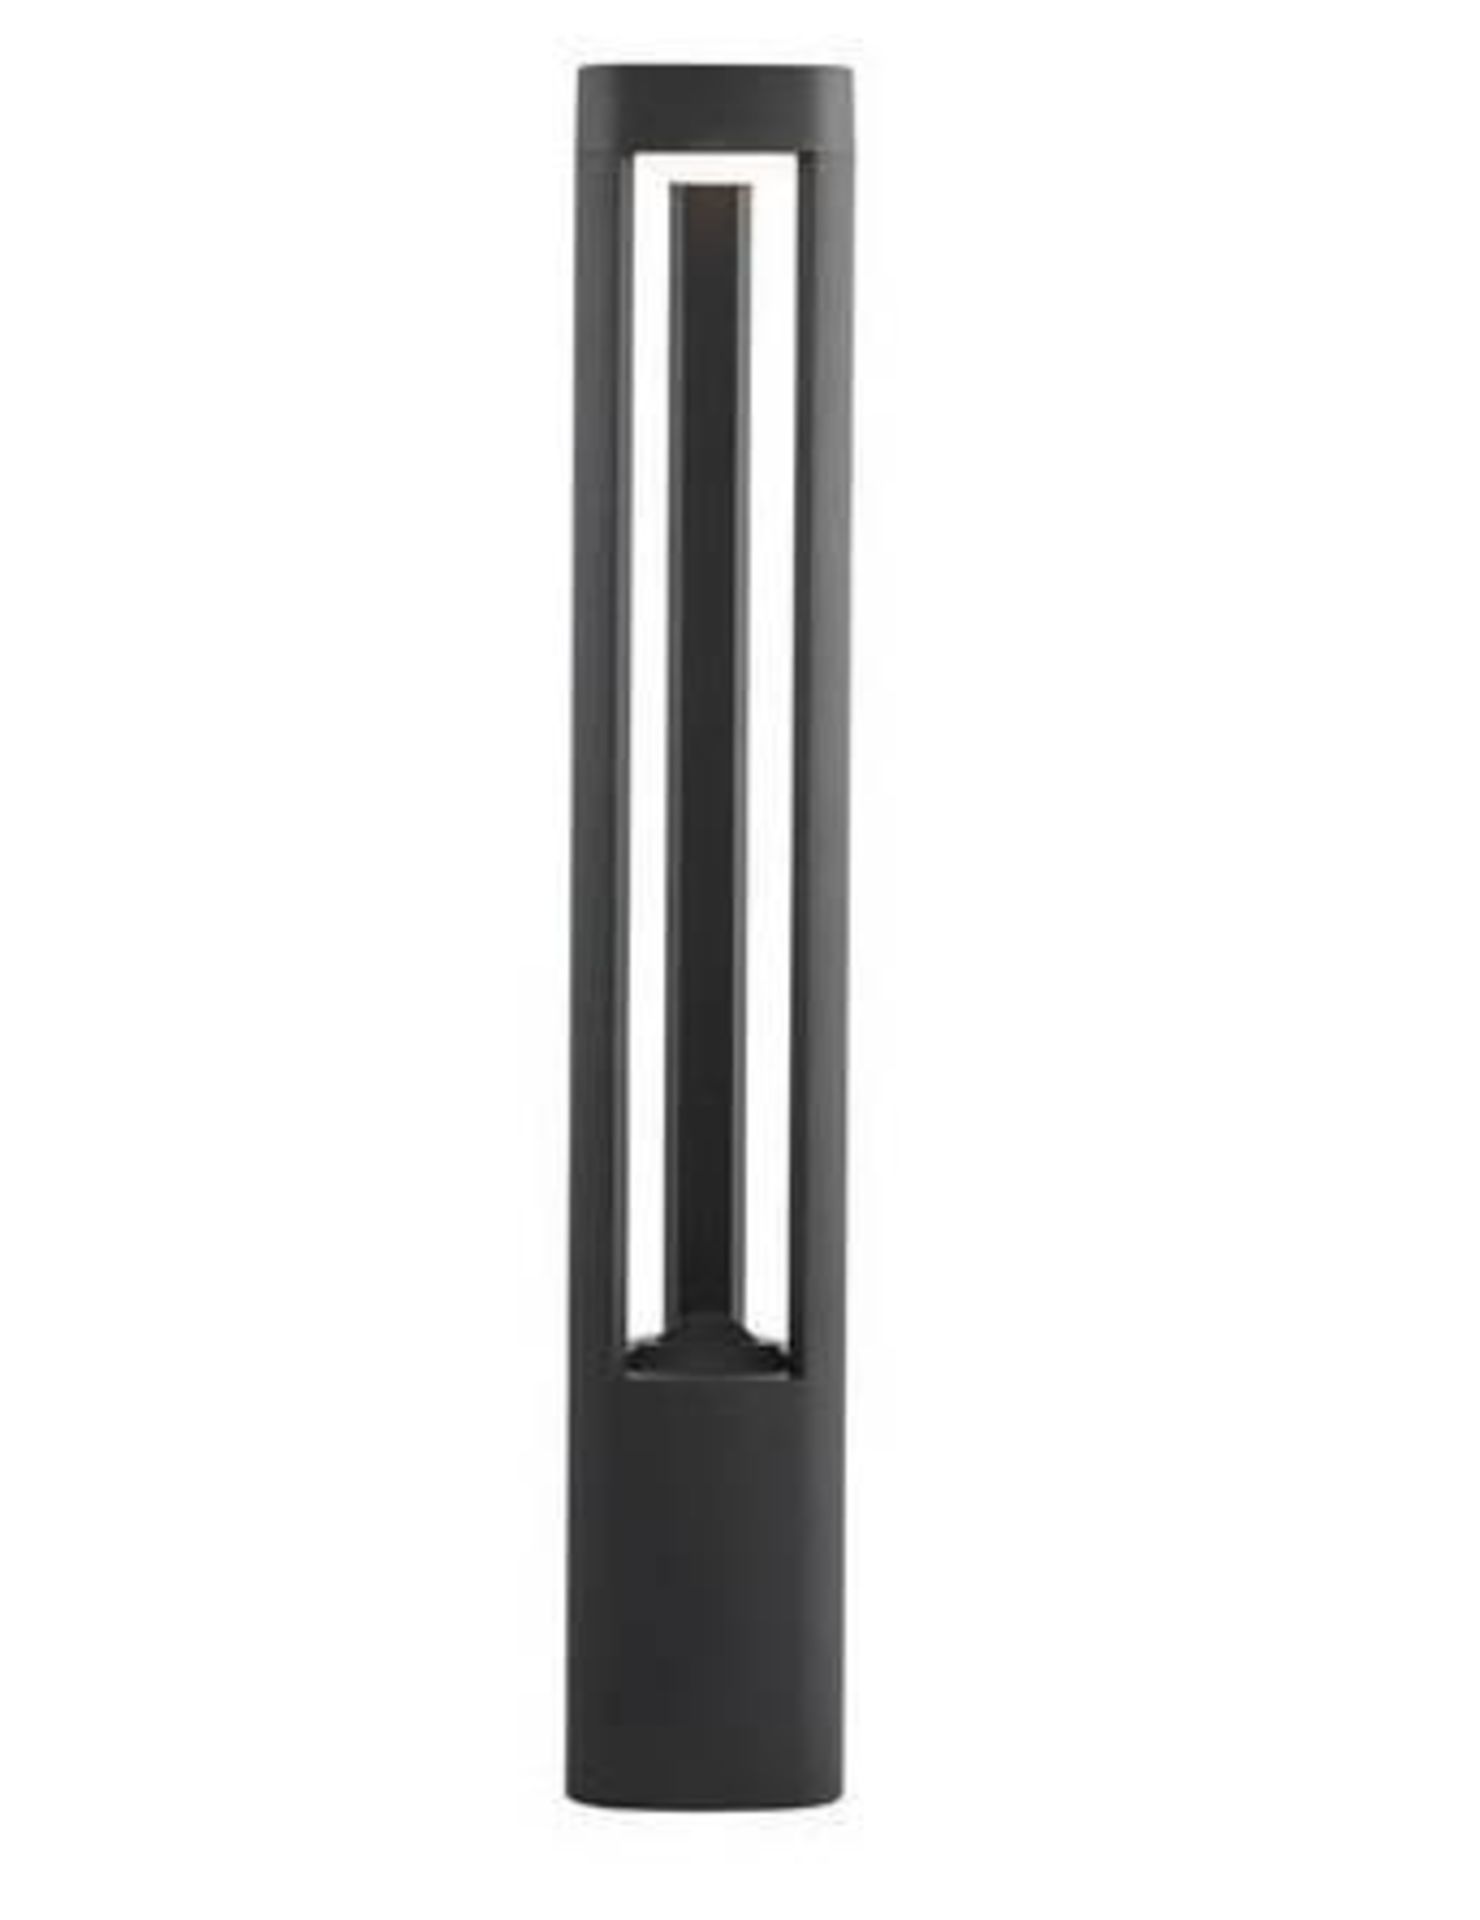 1 x Searchlight - LED Outdoor Post Lamp - CL323 - Ref: NO1 1005-500GY - WH1 AA5 - Location: Altrinch - Image 2 of 2